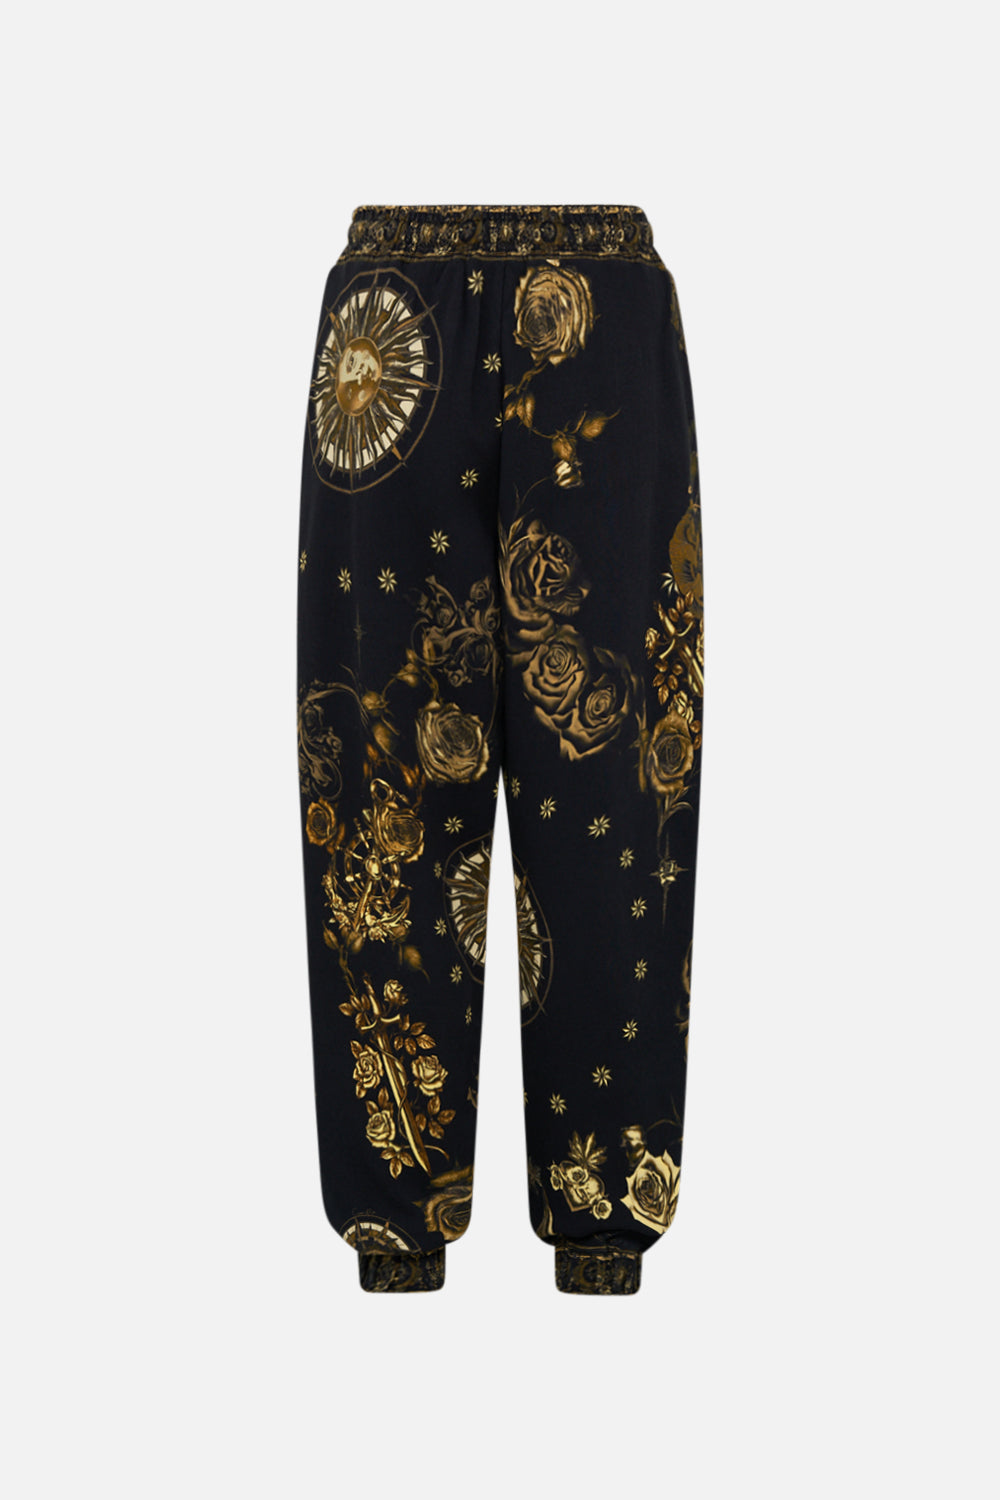 CAMILLA black jersey track pant in So Says The Oracle print.